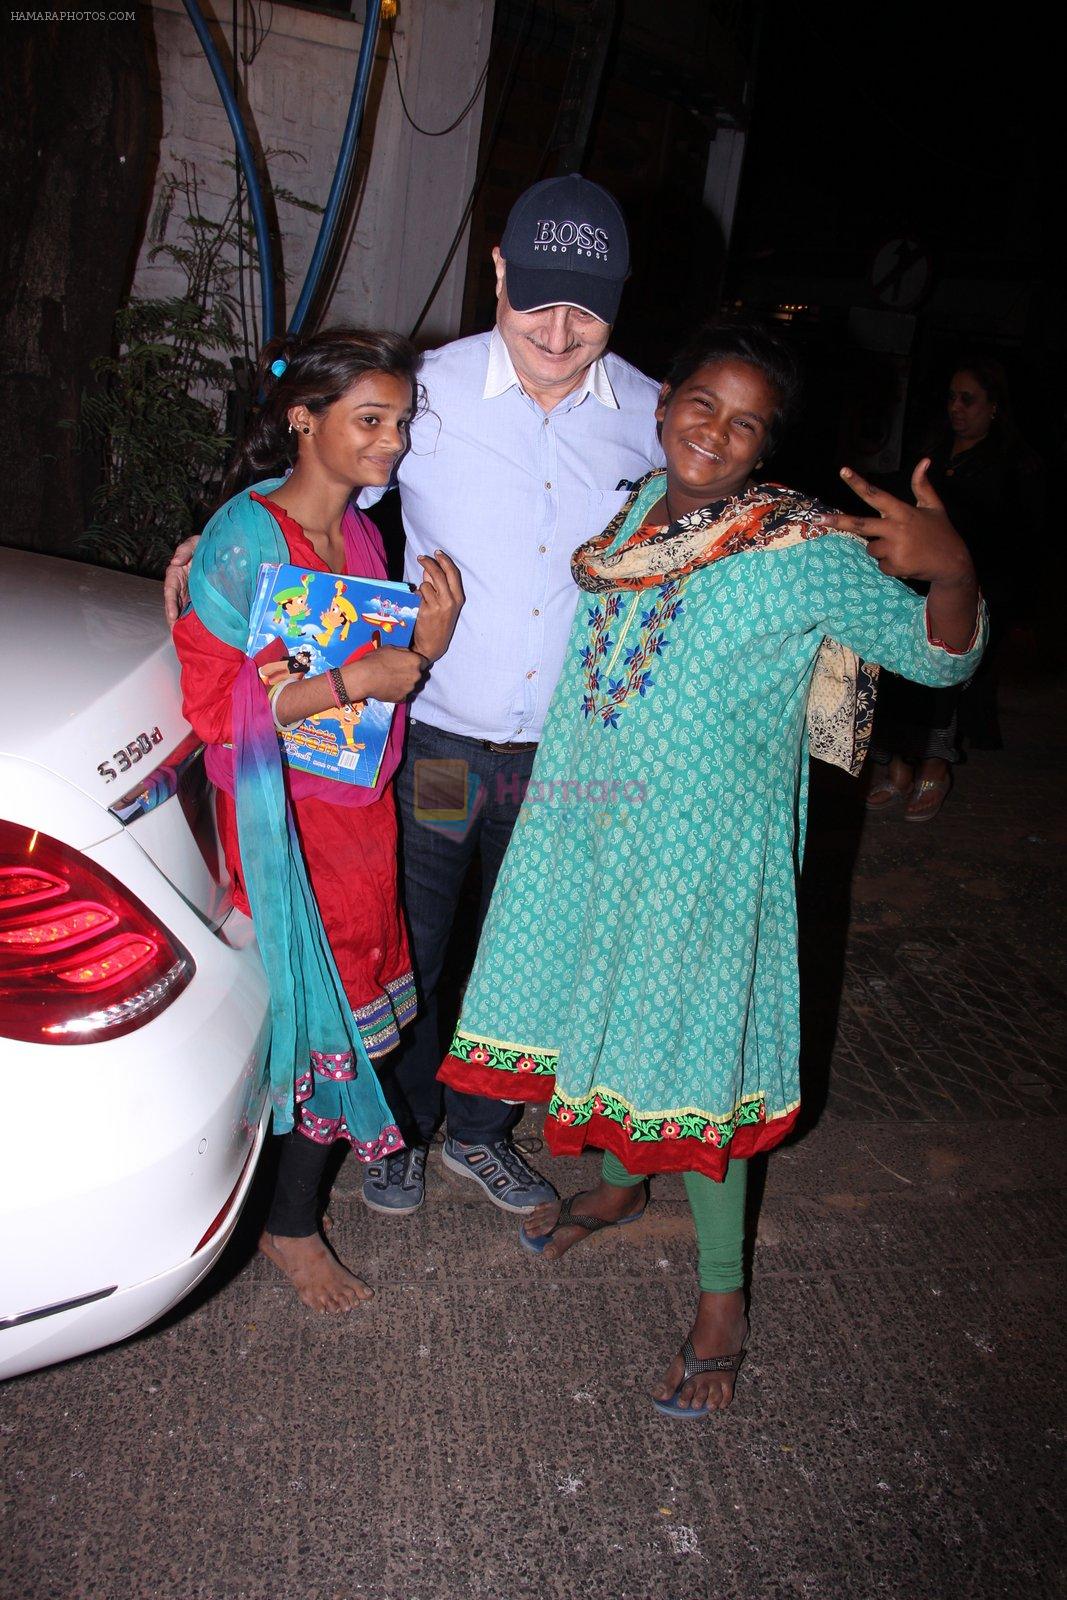 Anupam Kher snapepd with street kids on 30th Dec 2016